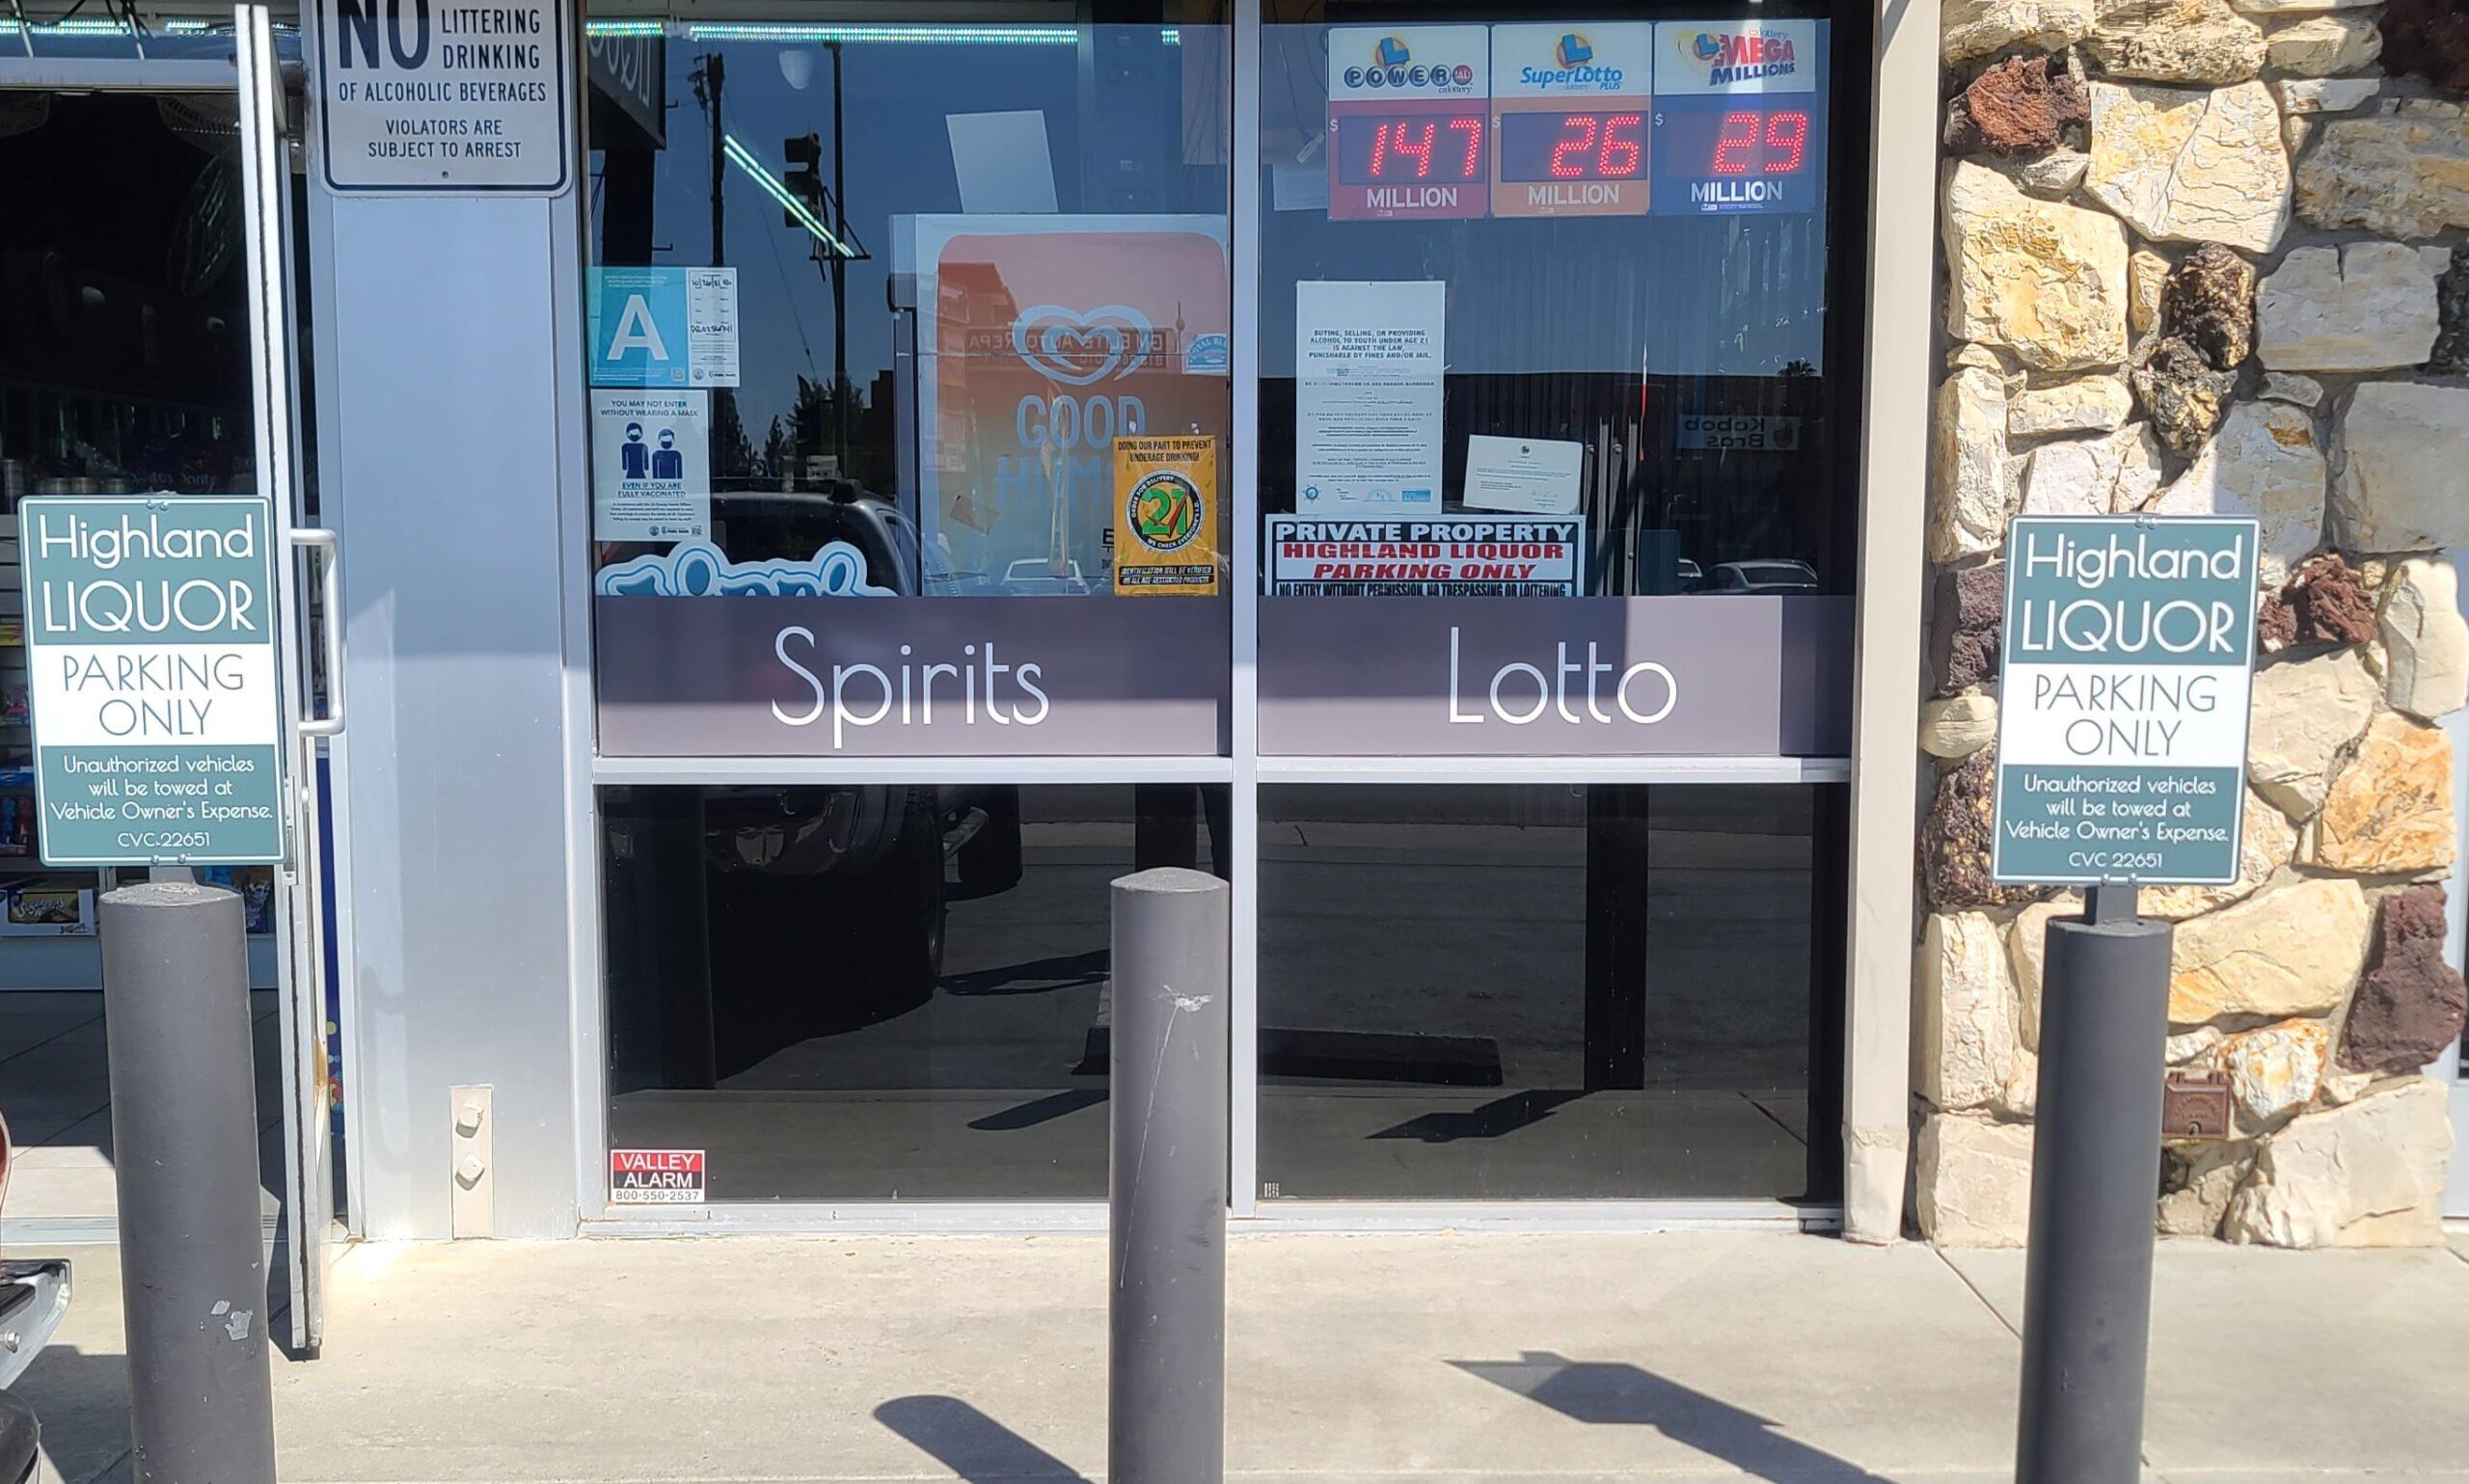 These aluminum signs for Highland Liquir's Granada Hills establishment frame the store's window signs advertising spirits and lotto - life's essentials!